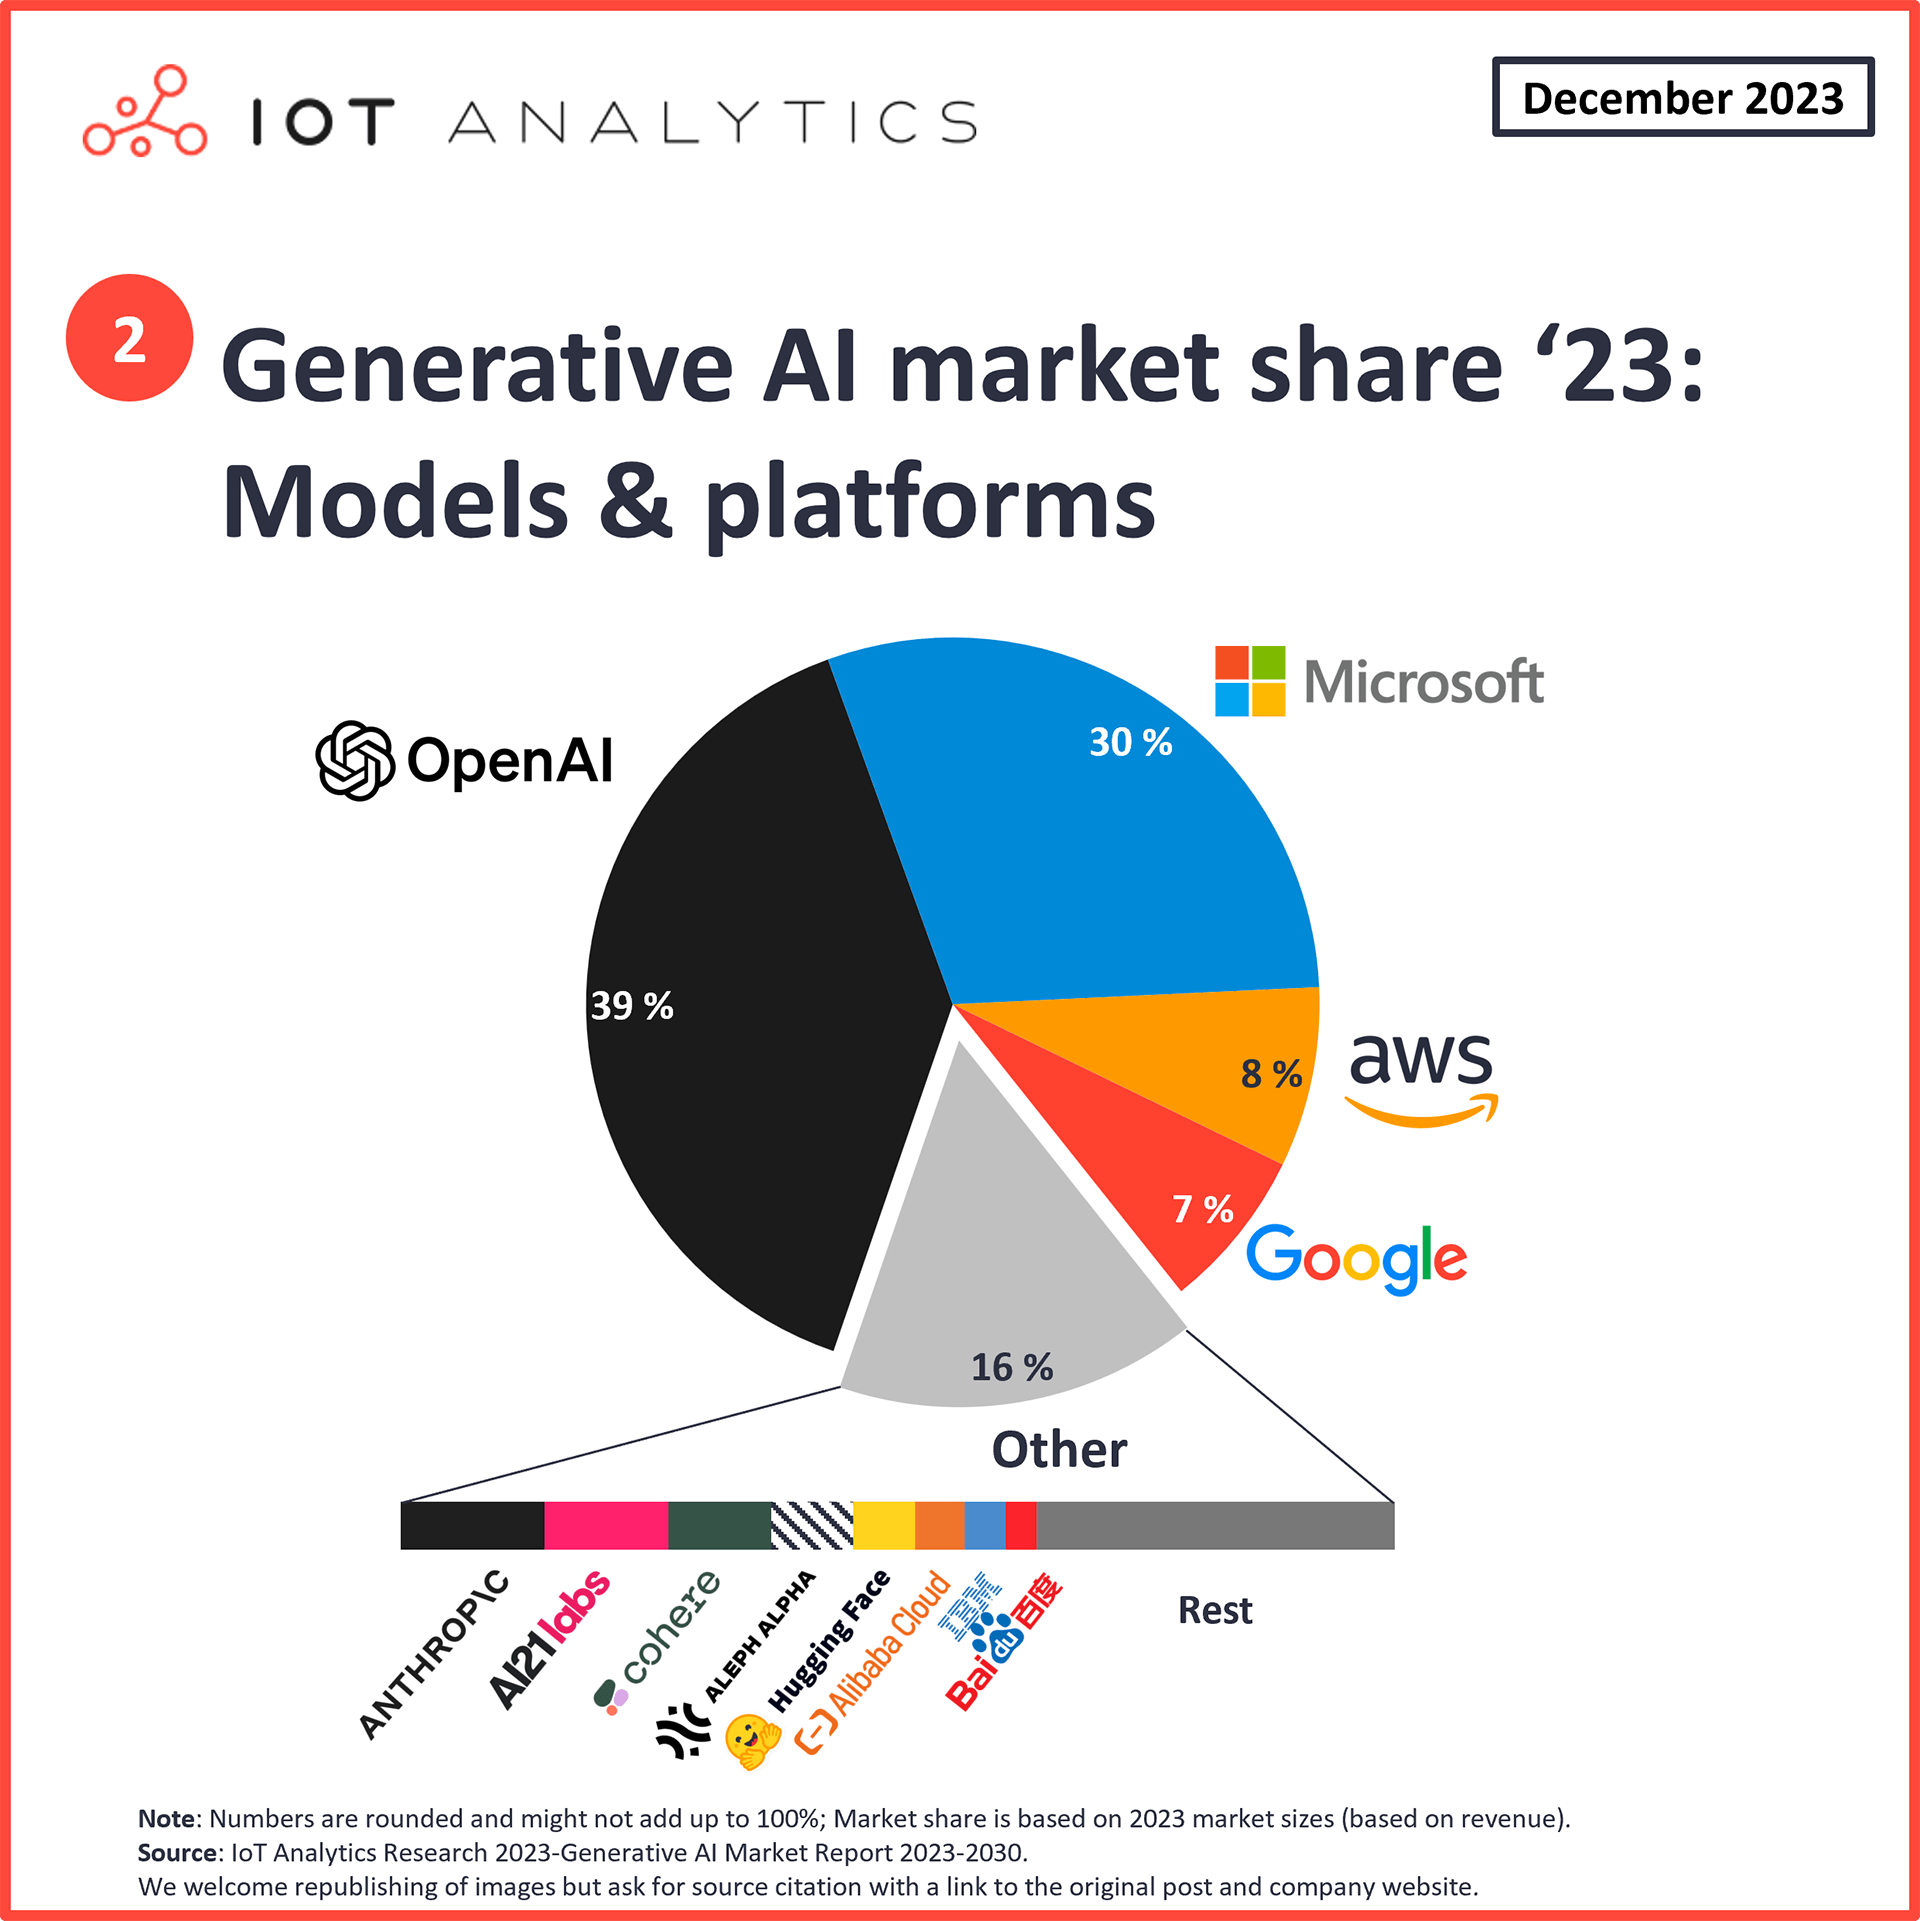 Graphic: Generative AI models and platforms market share 2023